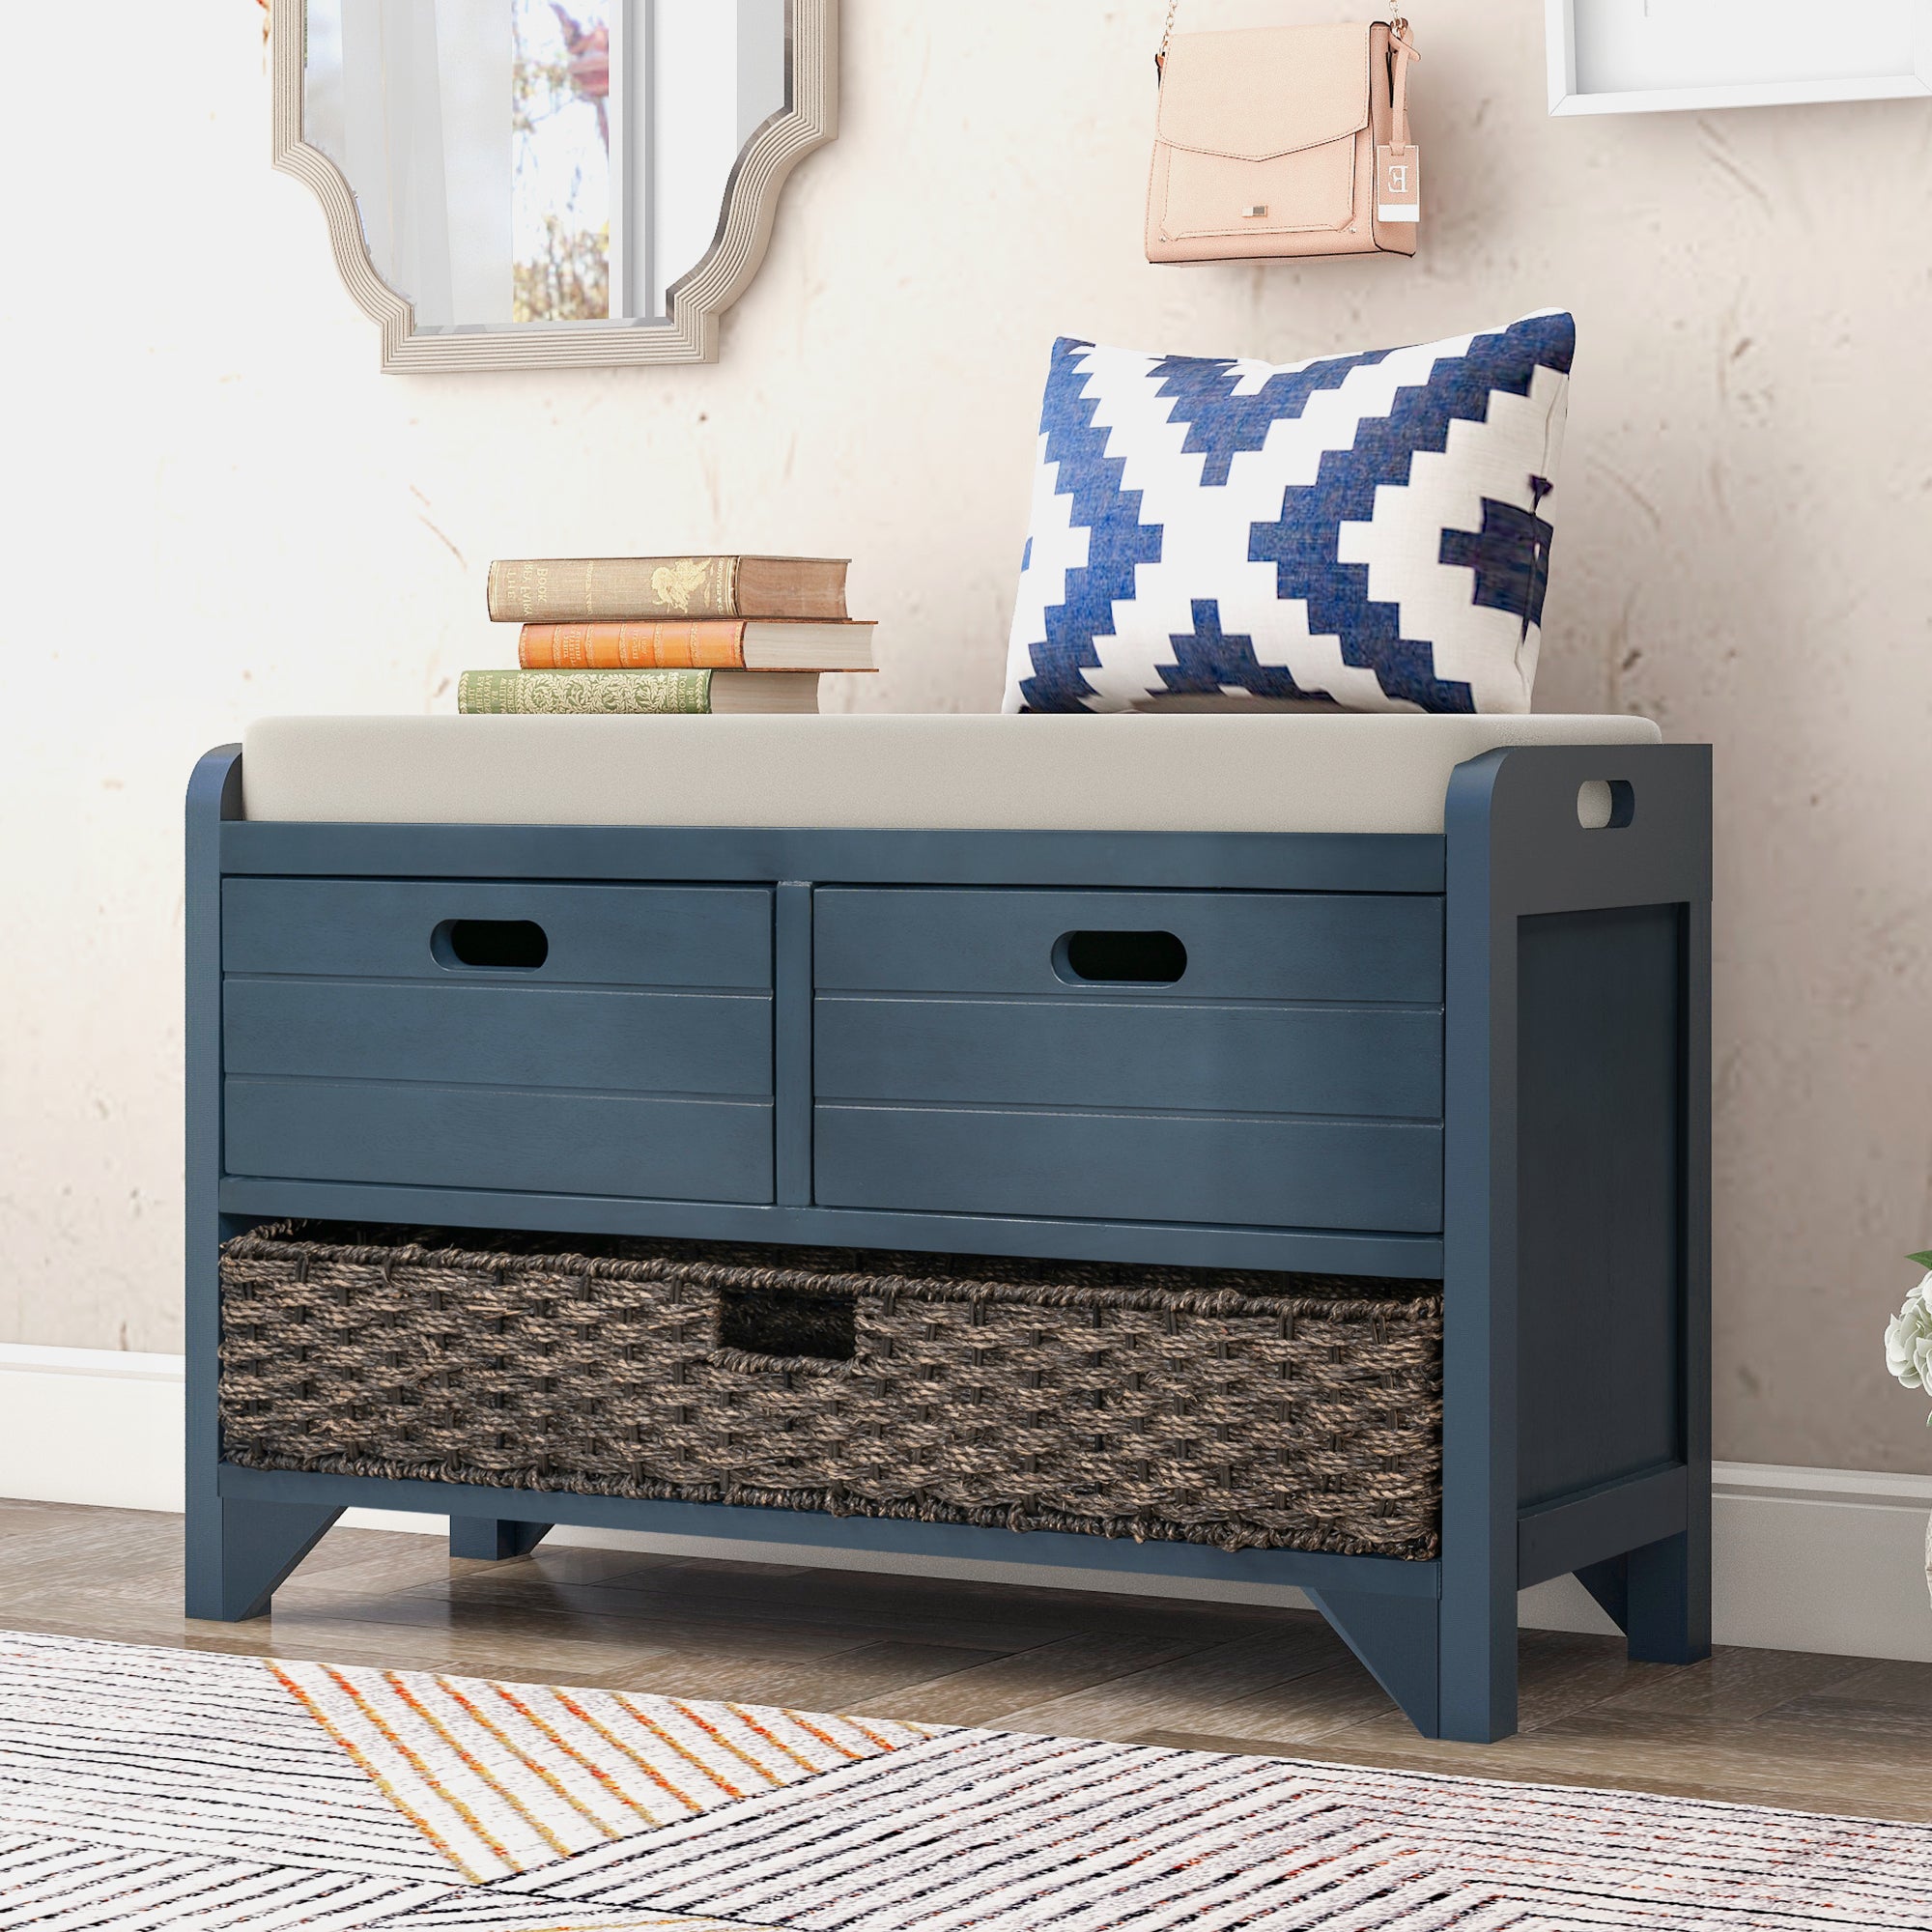 TREXM Storage Bench with Removable Basket (Navy Blue)